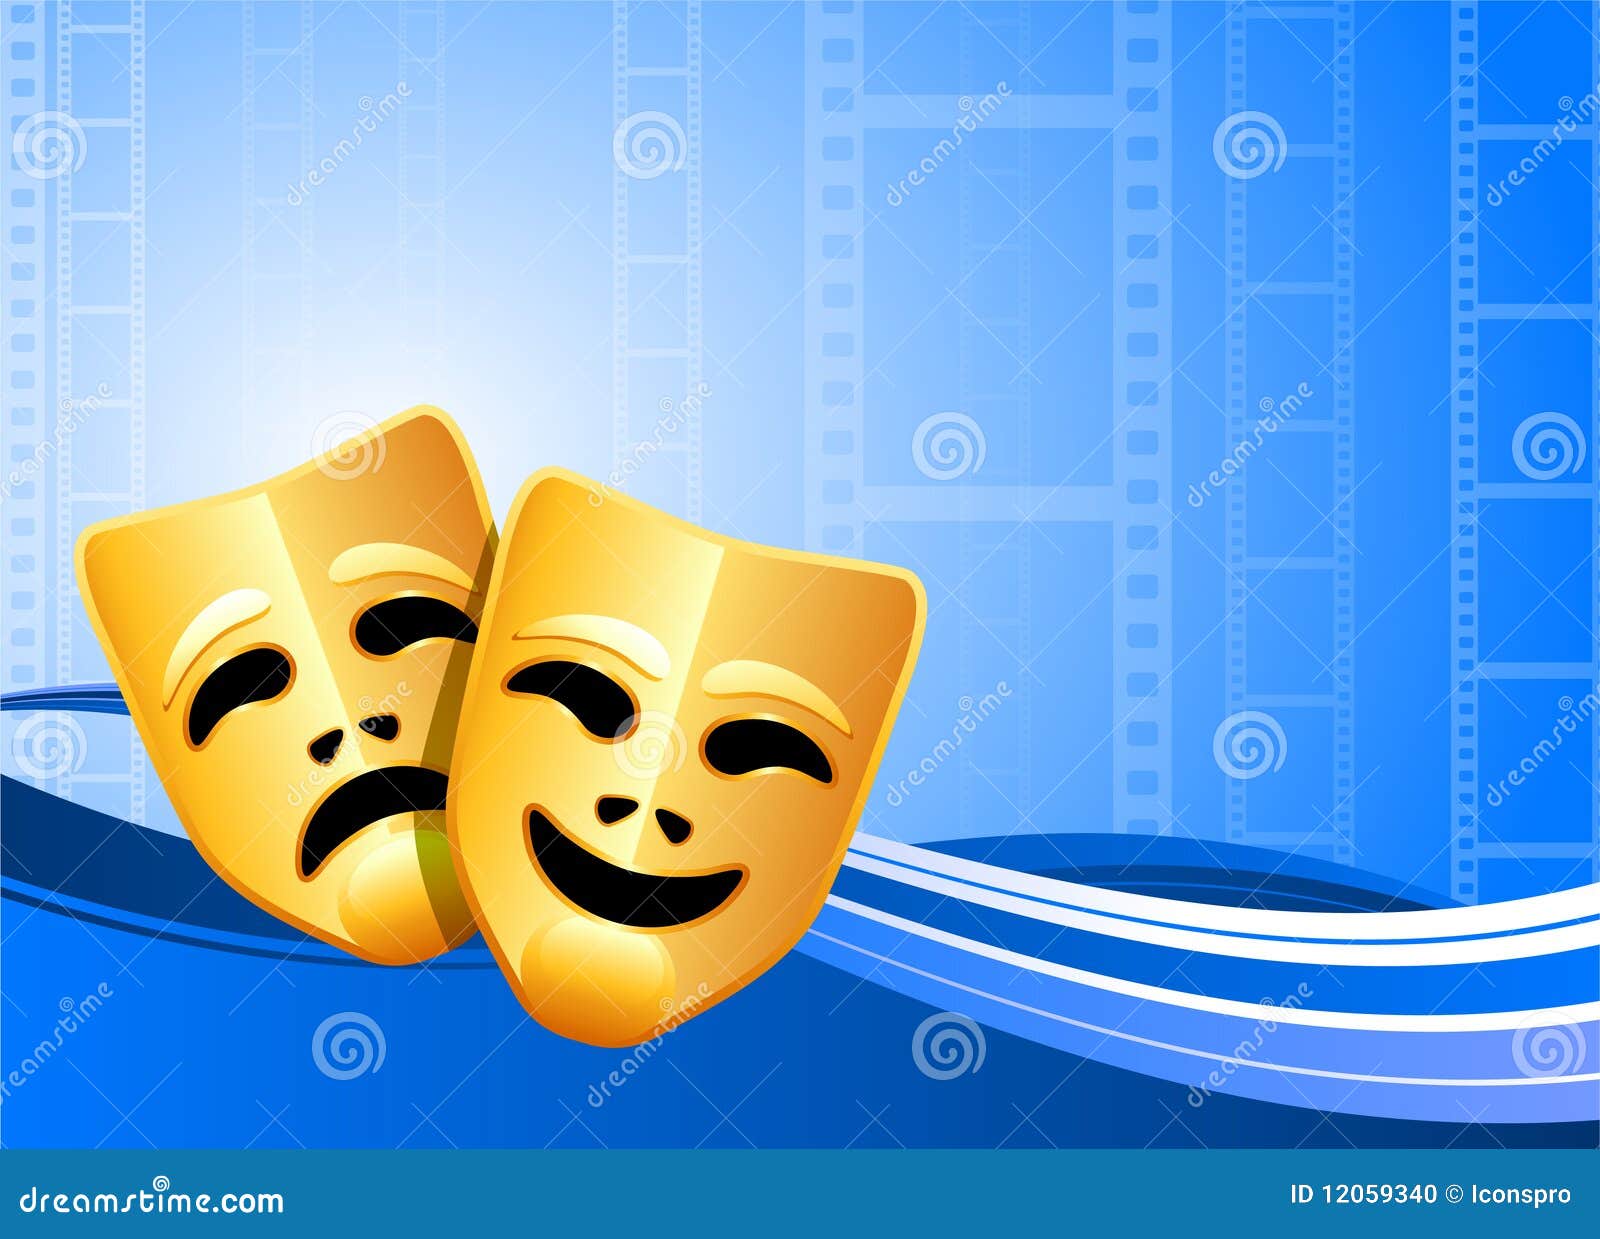 Comedy And Tragedy Theater Masks Background Stock Photo ...